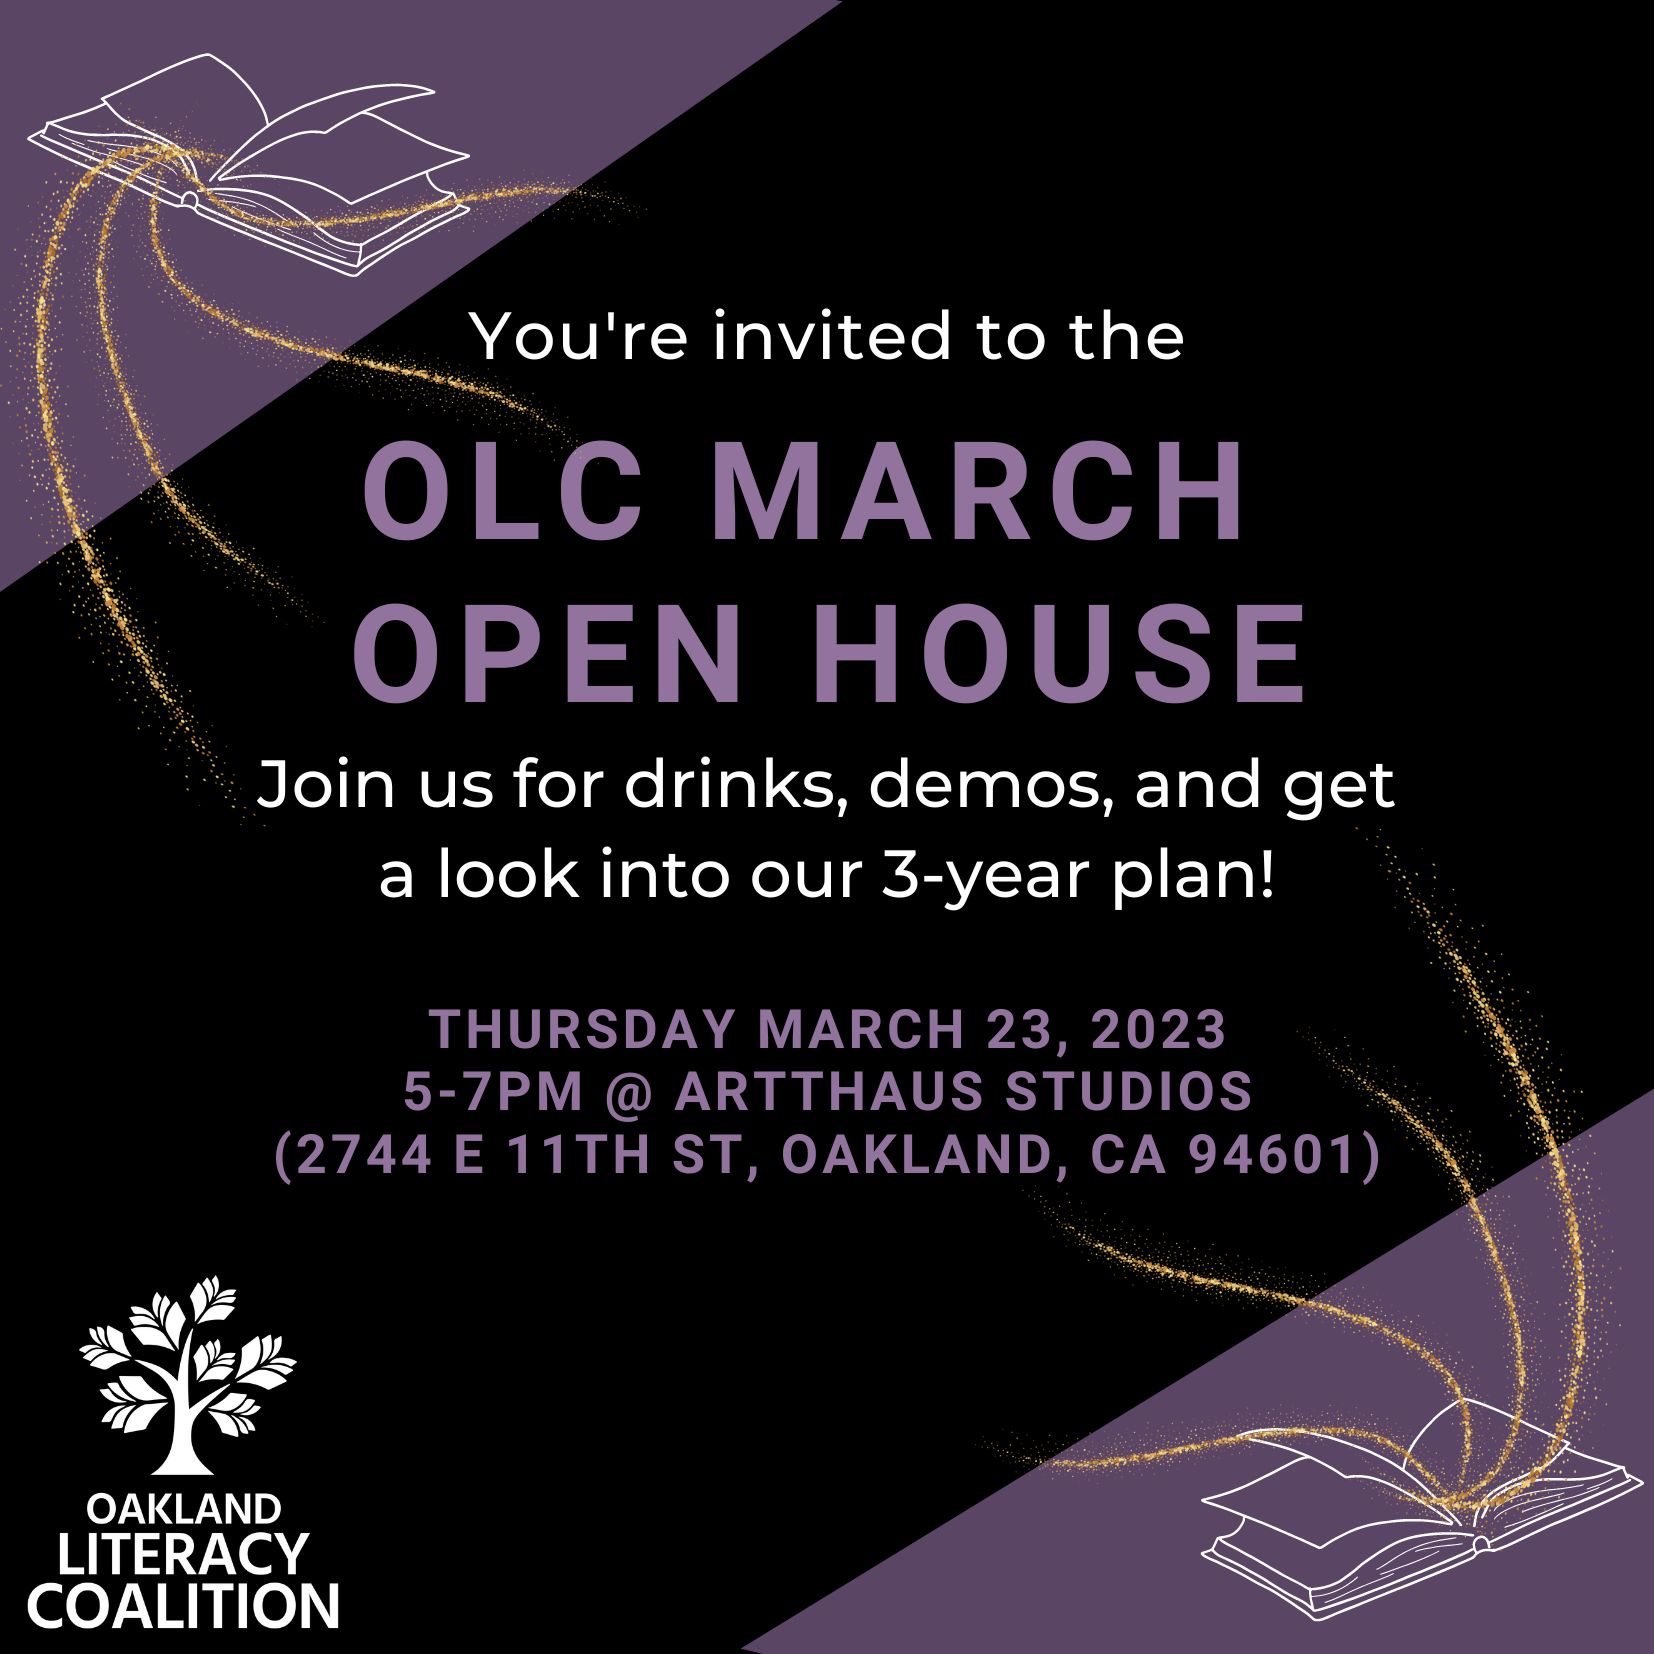 OLC March Open House